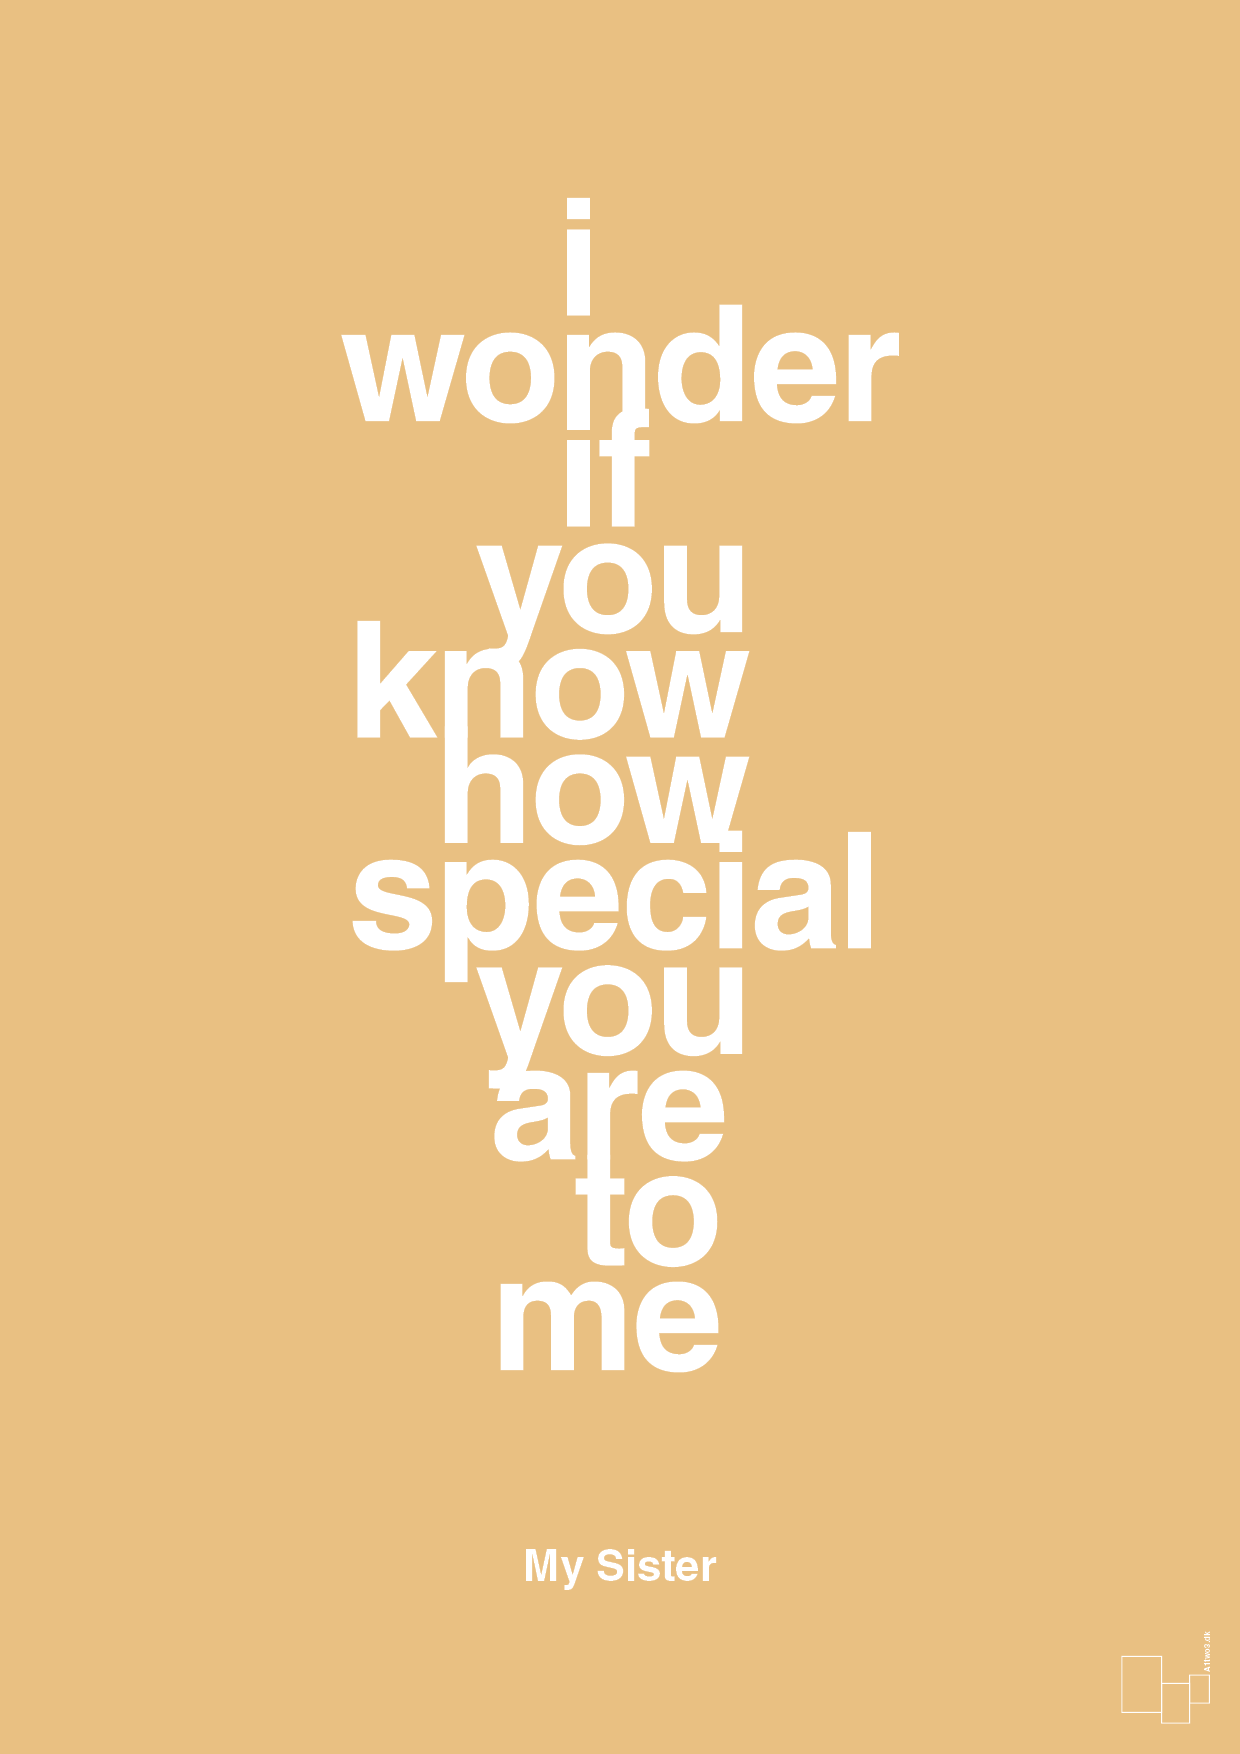 my sister - i wonder if you know how special you are to me - Plakat med Citater i Charismatic